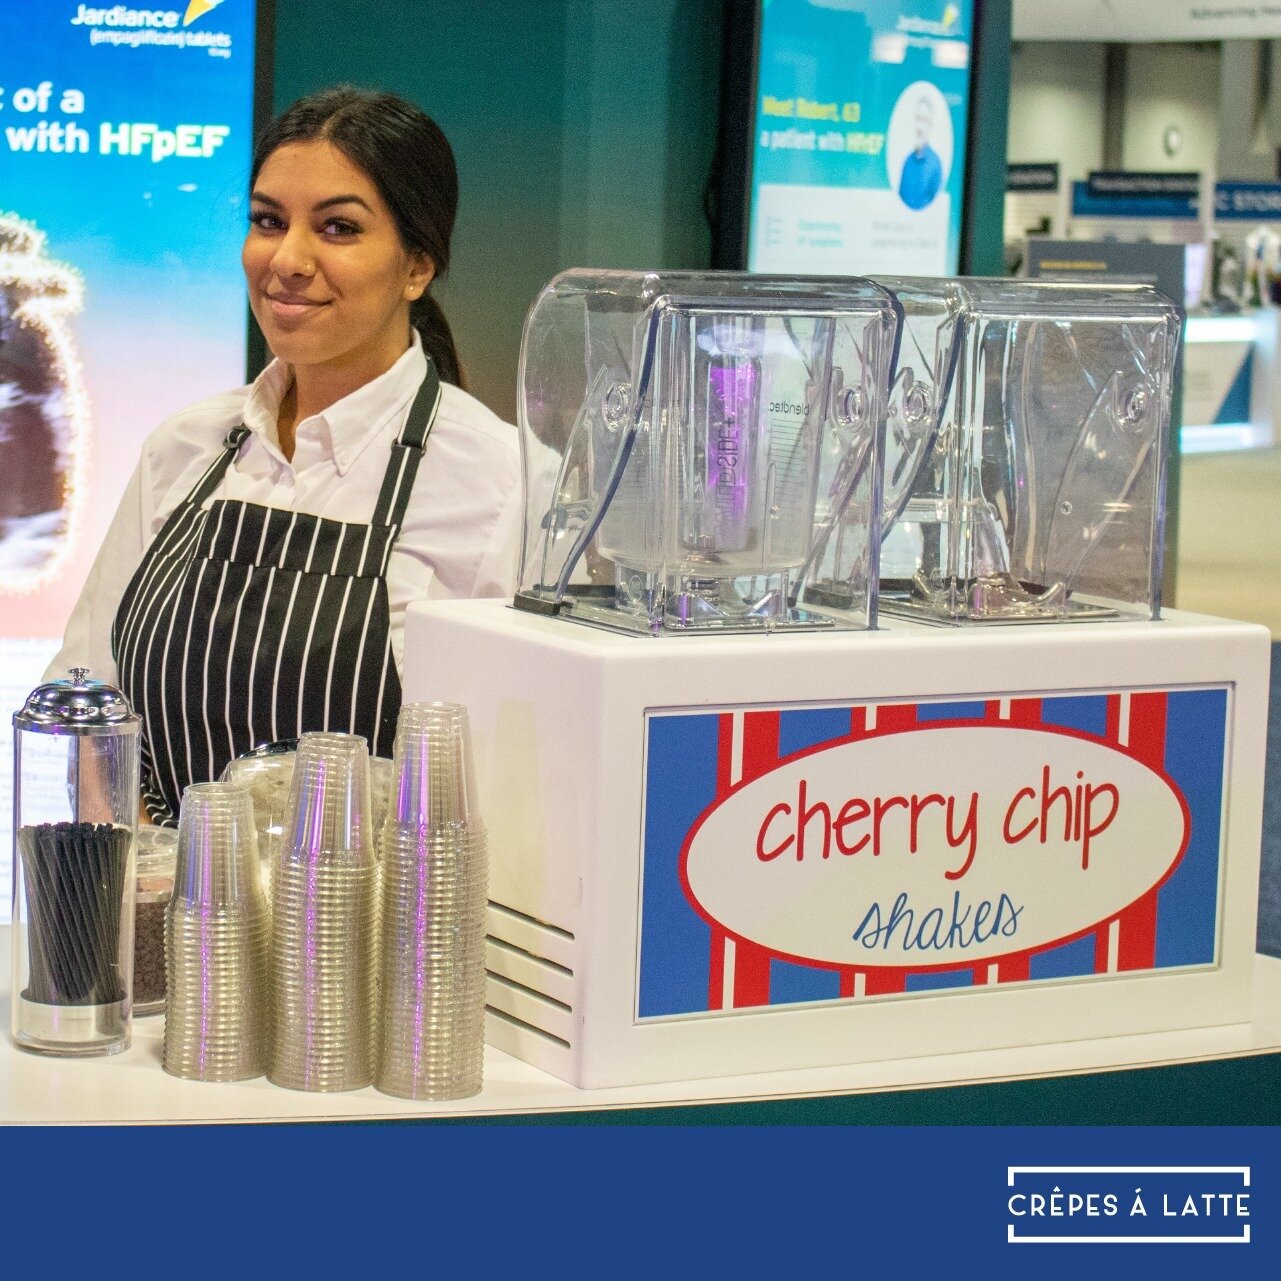 Warm summer days call for a refreshing frozen beverage, like our delicious Cherry Chip Shake! Contact us to offer this or any of our other 100+ in-booth services at your next #tradeshow. #hospitality #attractattendees #shake